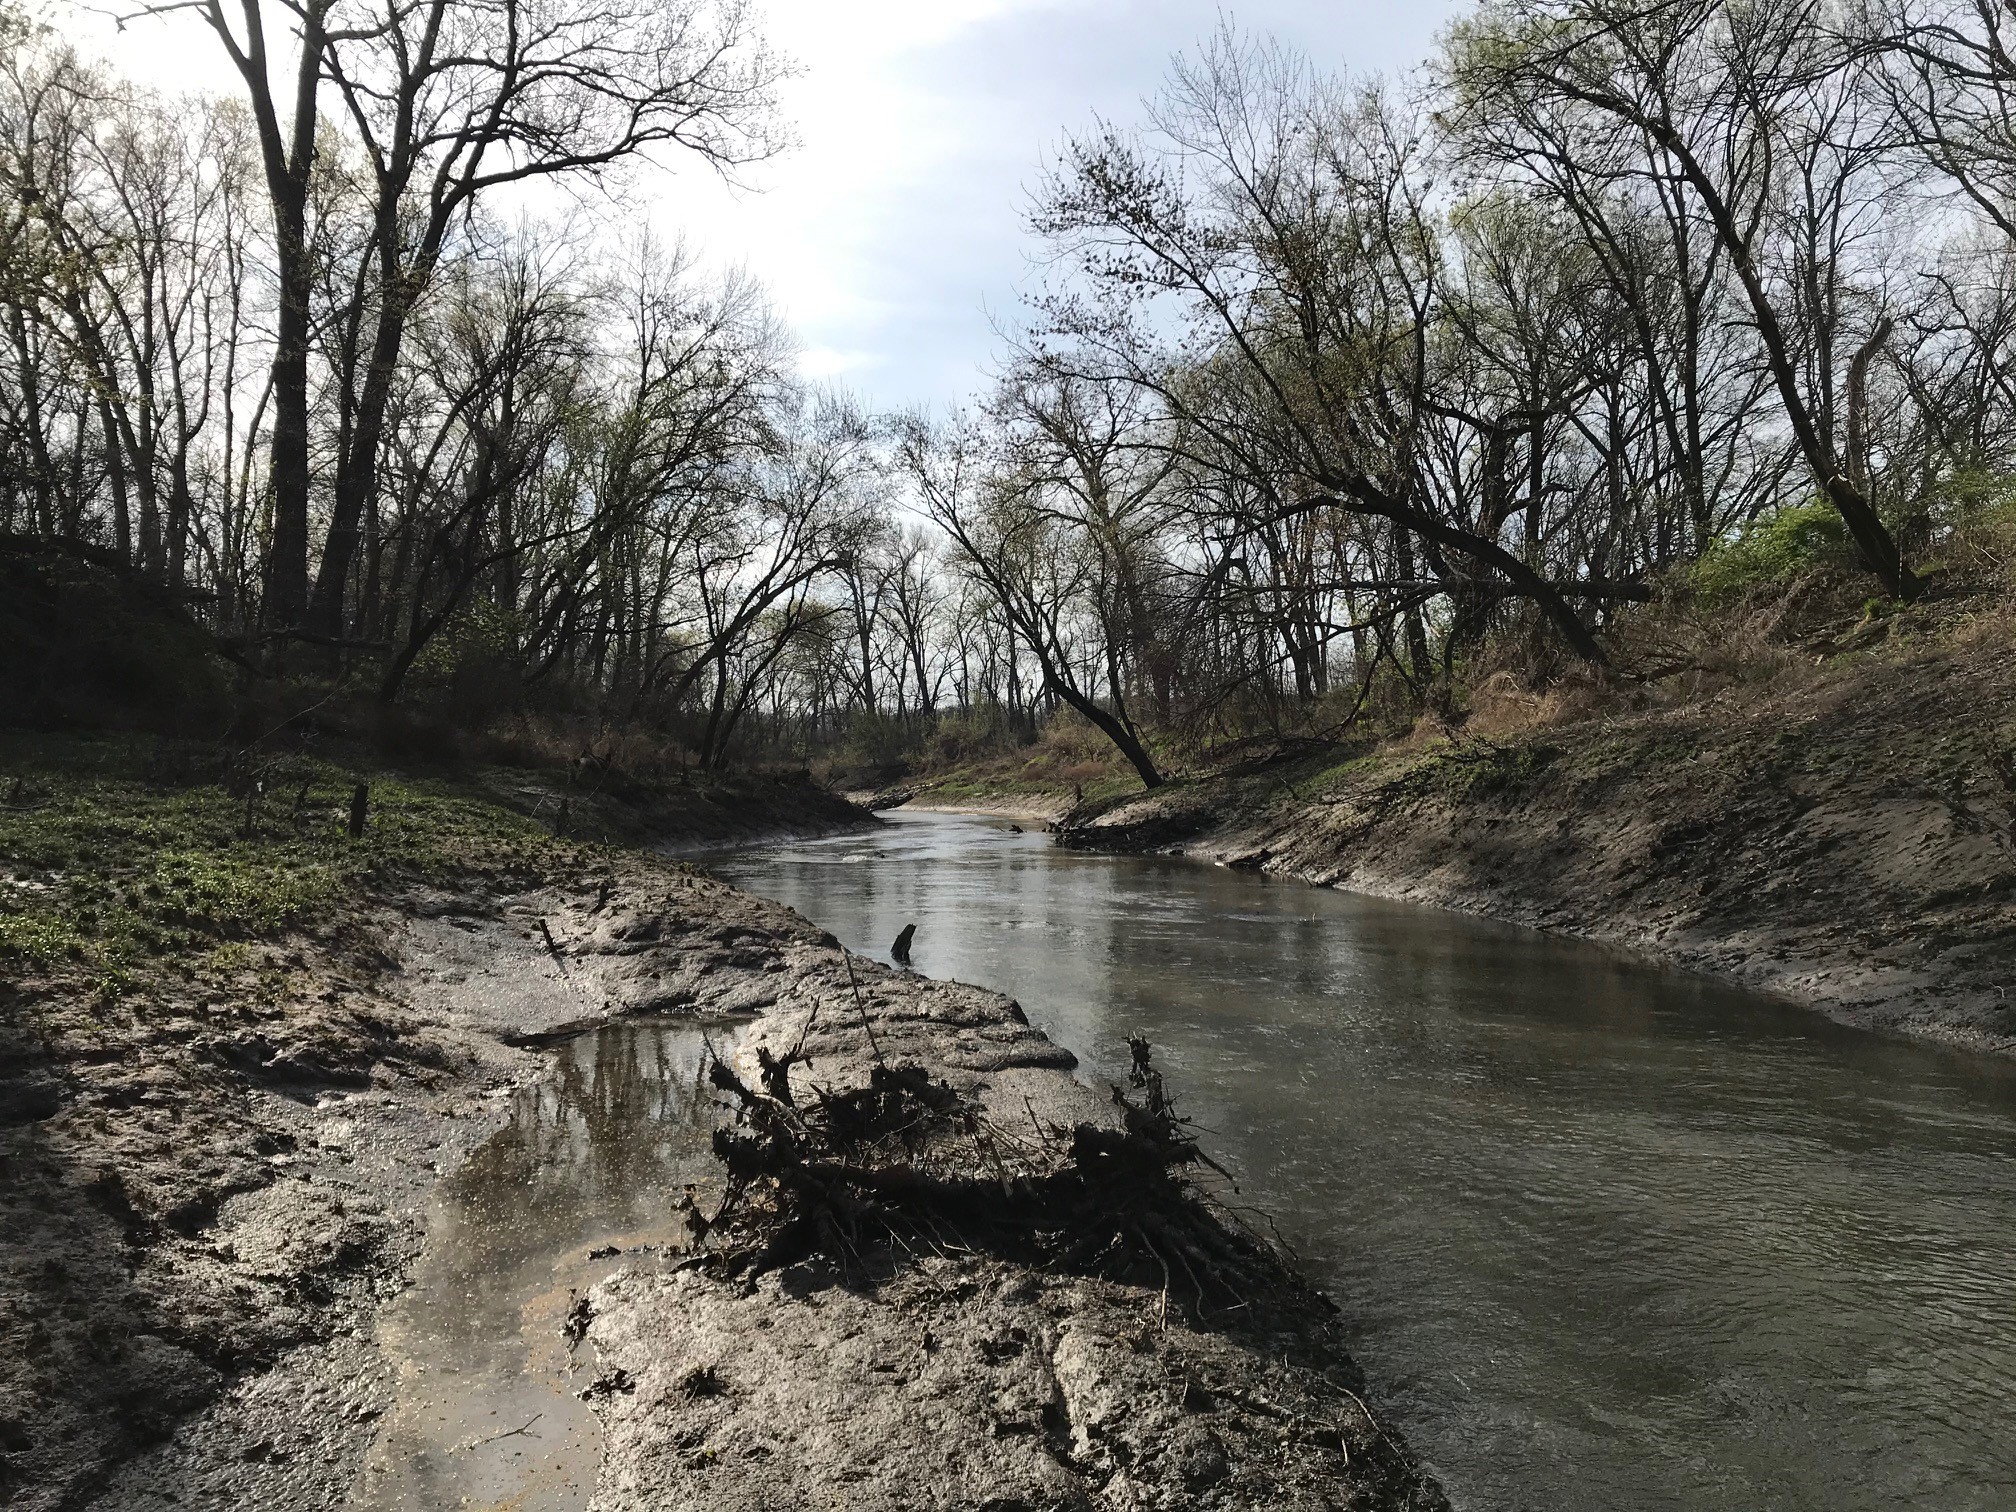 Facing downstream at the lower Wakarusa River site, 6 April 2021.